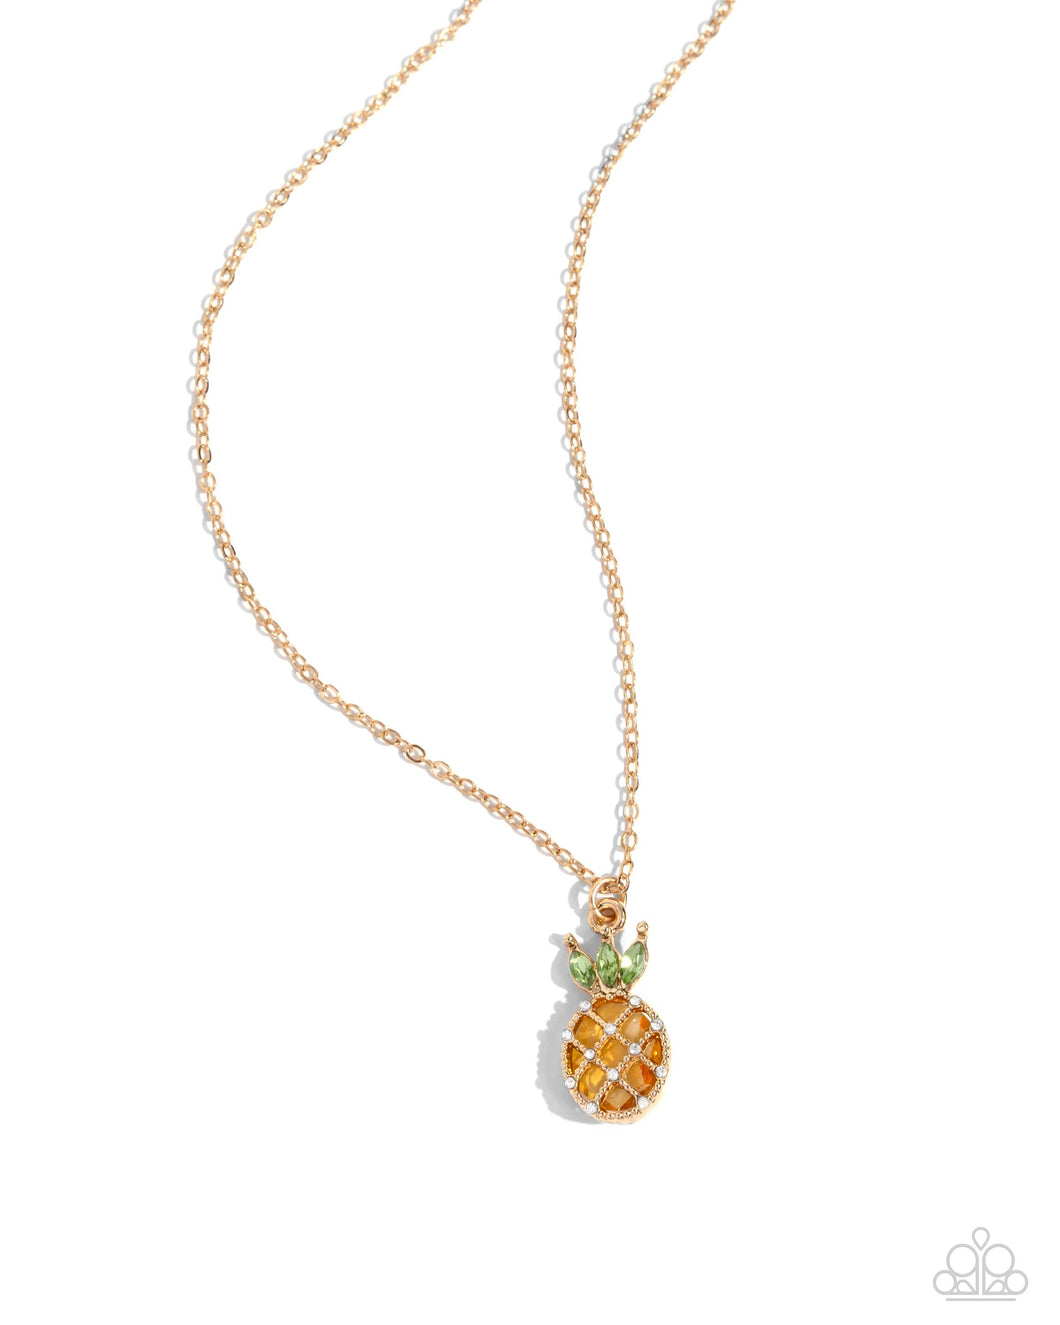 Pineapple Persistence - Yellow Necklace